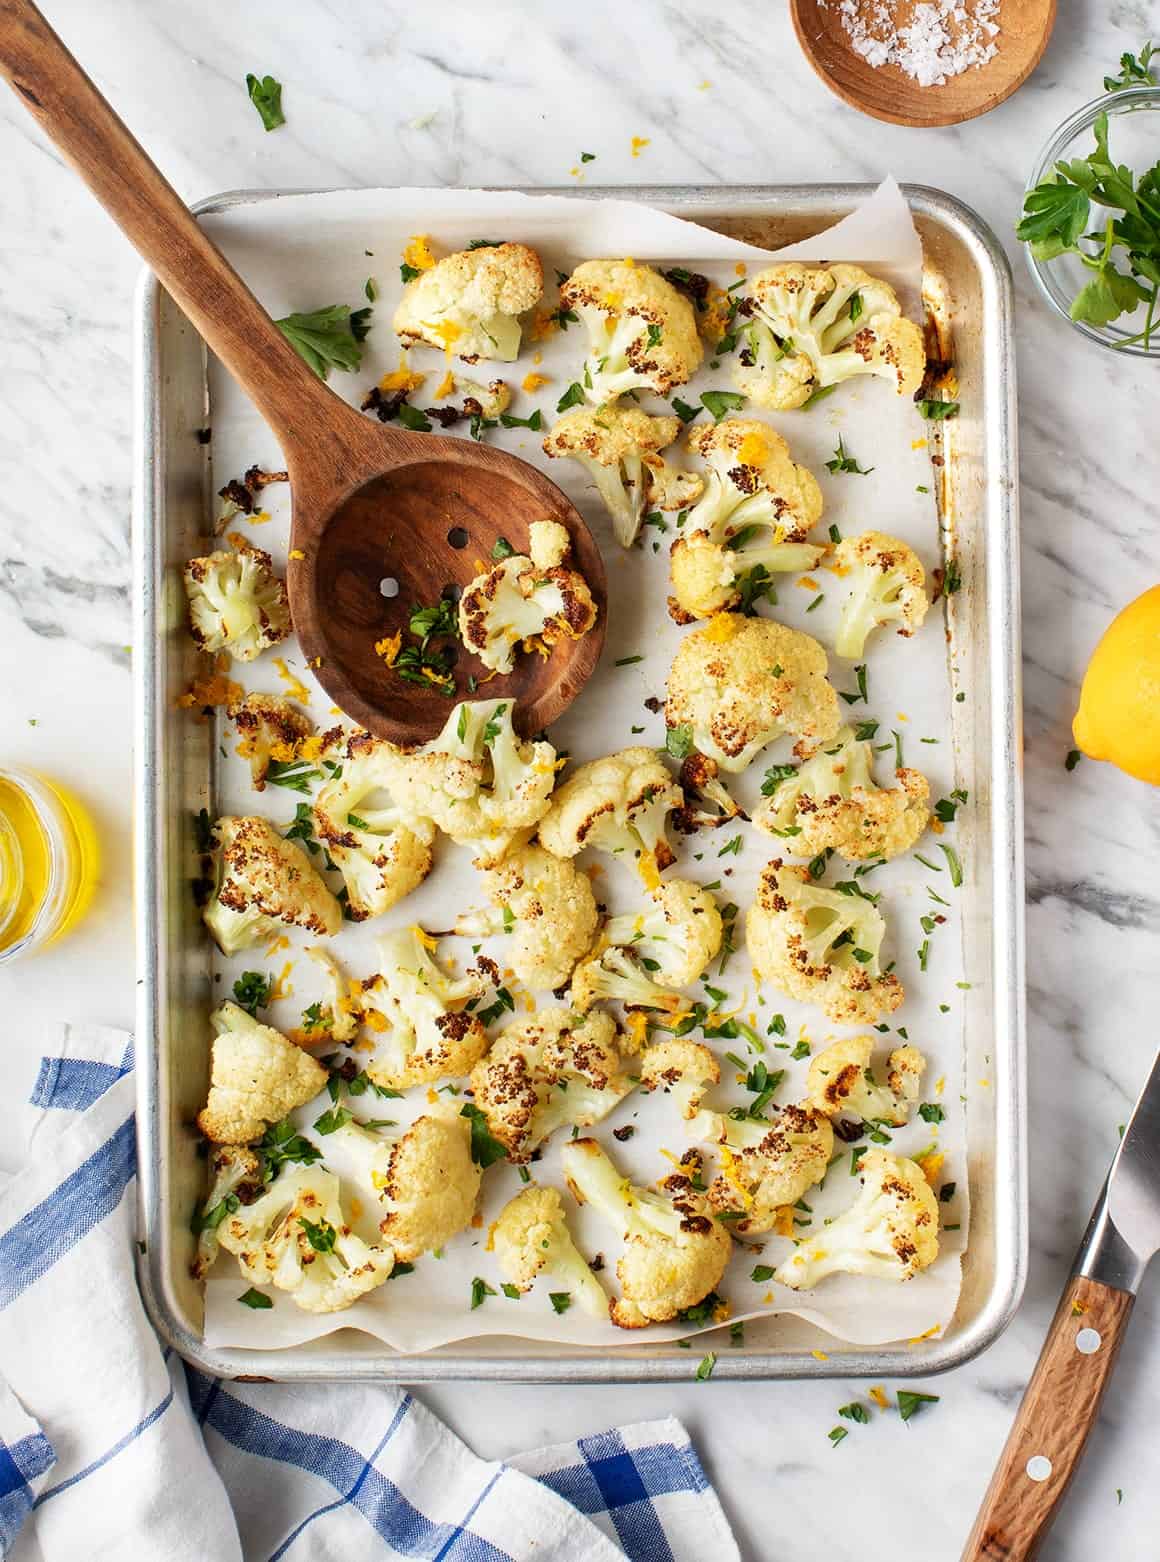 Oven Roasted Cauliflower on baking sheet with wooden spoon